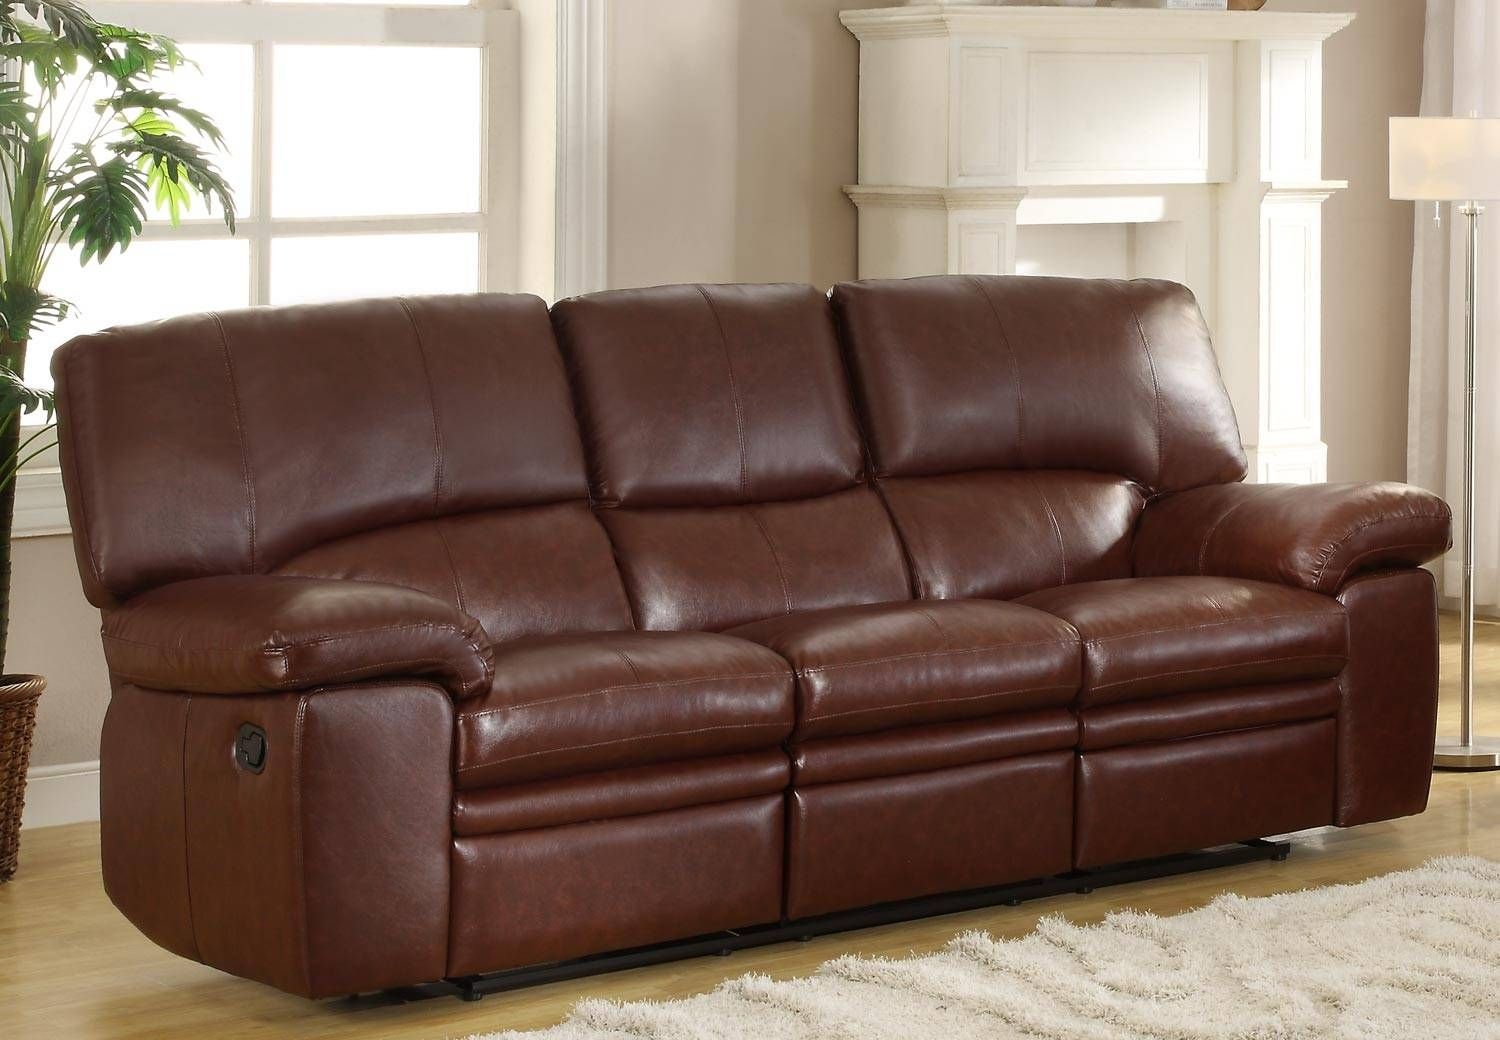 Sofas Center : 34 Frightening Bonded Leather Sofa Picture Design With Bonded Leather Sofas (View 9 of 15)